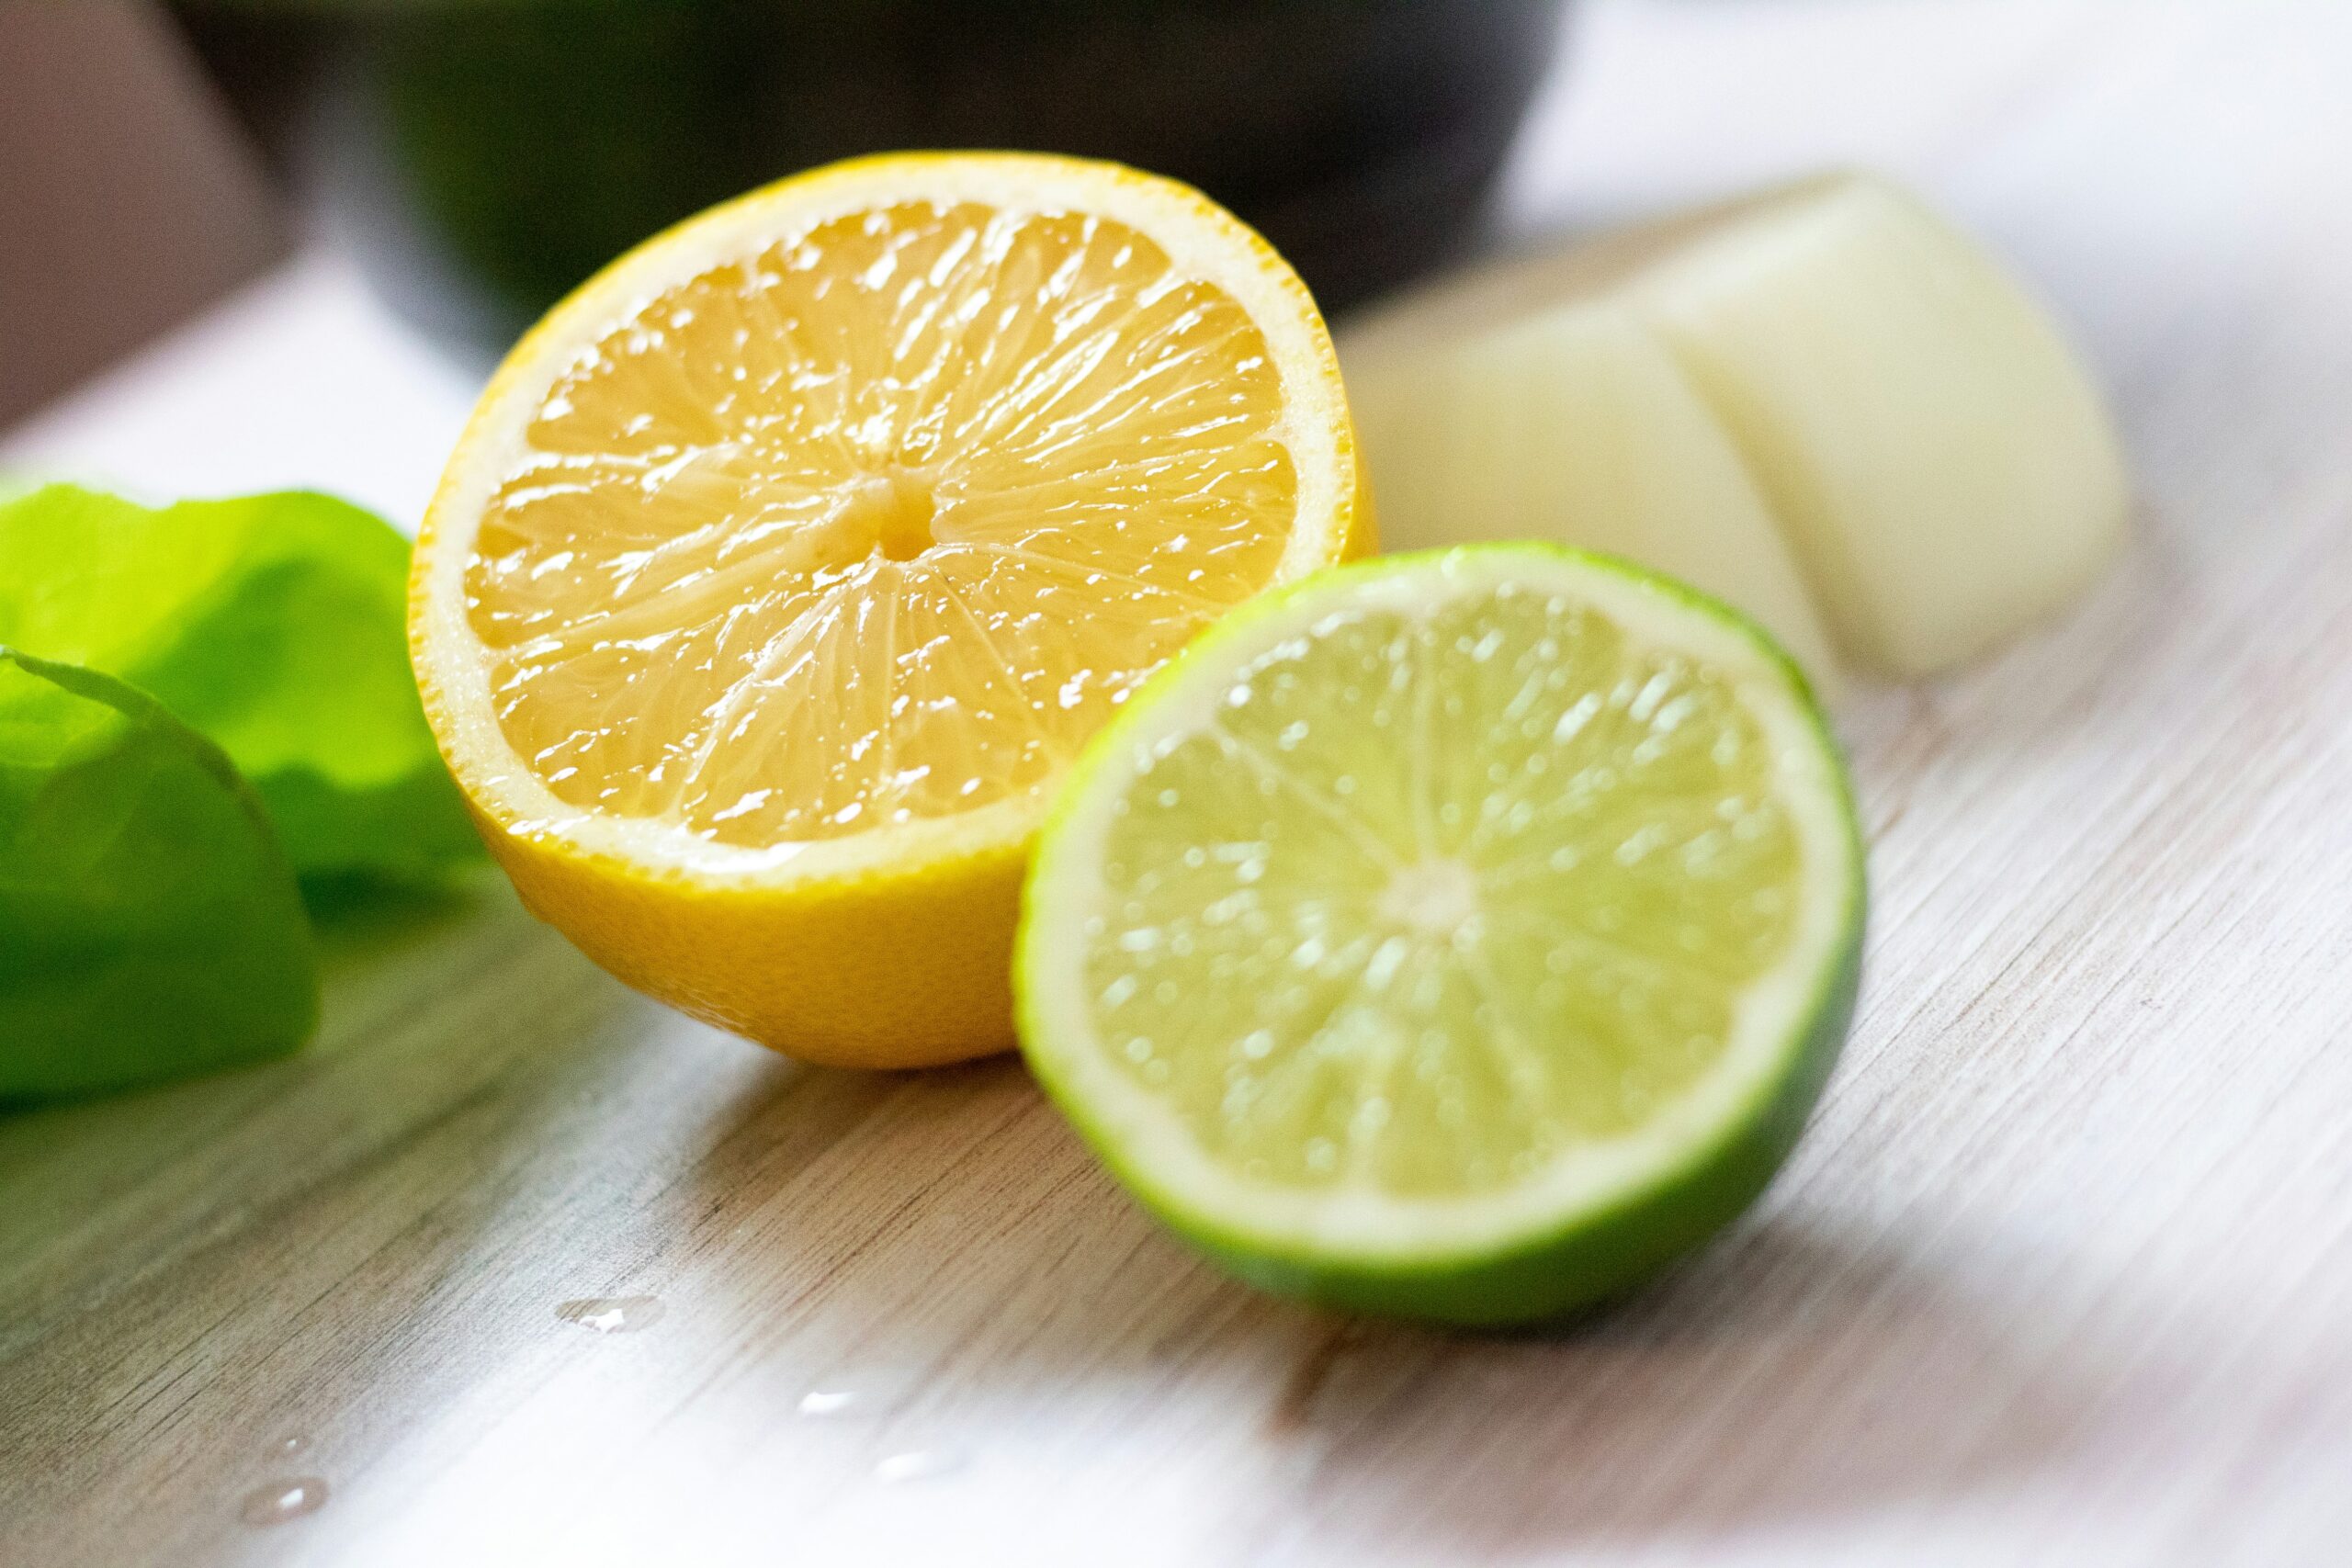 Lemon and lime juice are a major ingredient in the cortisol cocktail that enhance Vitamin C intake. Picture: fresh lemon and lime